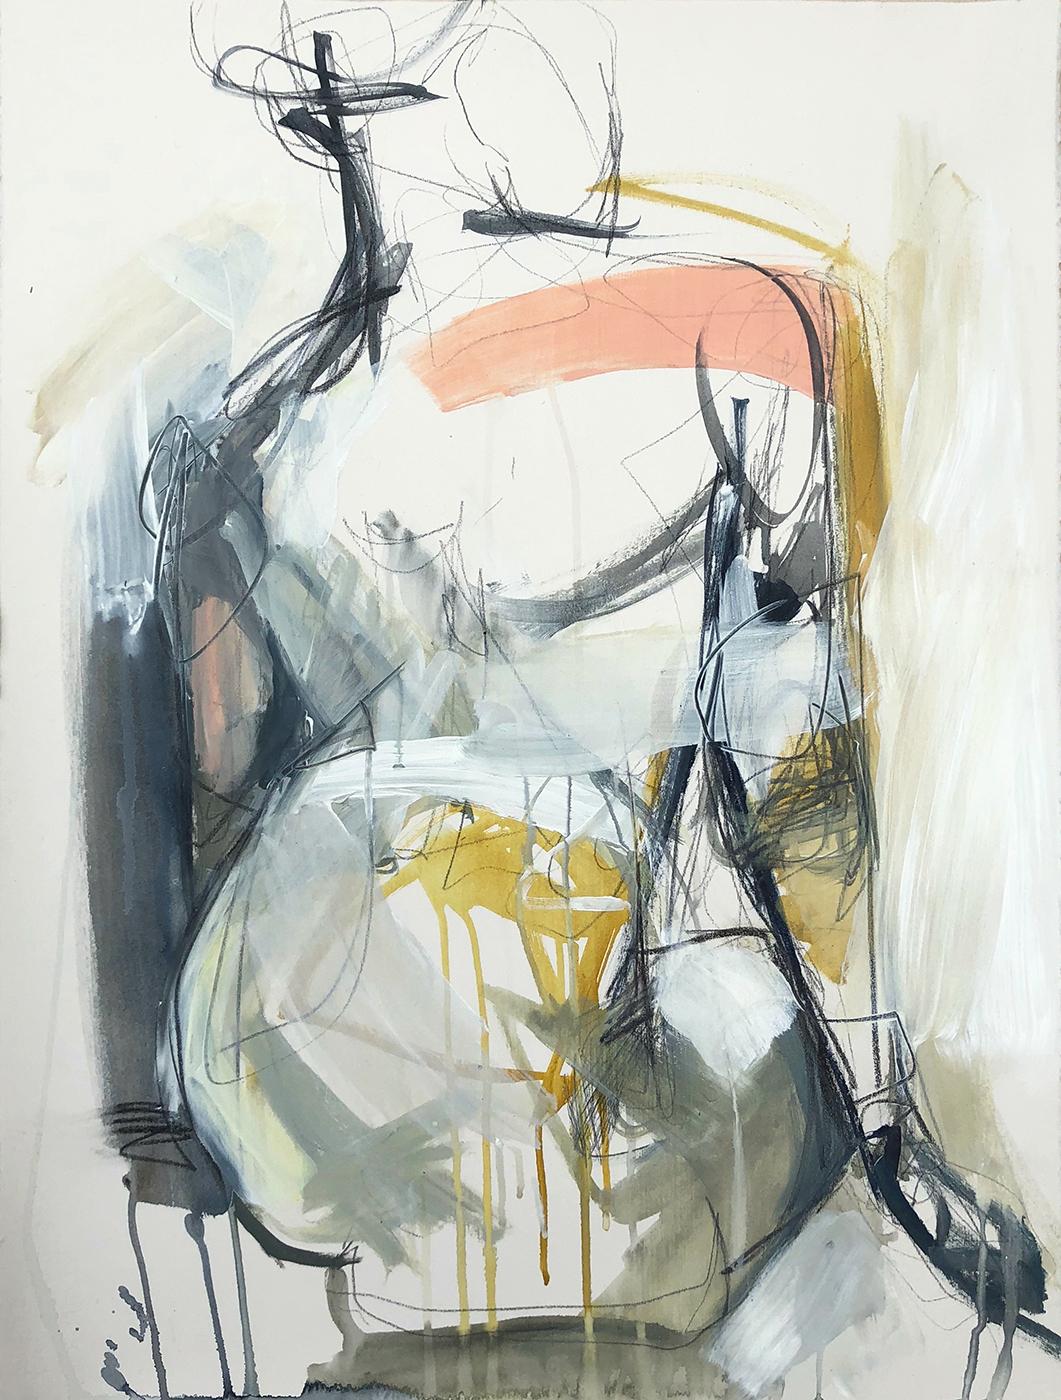 Kelley B. Ogburn Nude Painting - Presence by Kelley Ogburn, Framed Vertical Abstract Mixed Media on Paper Piece